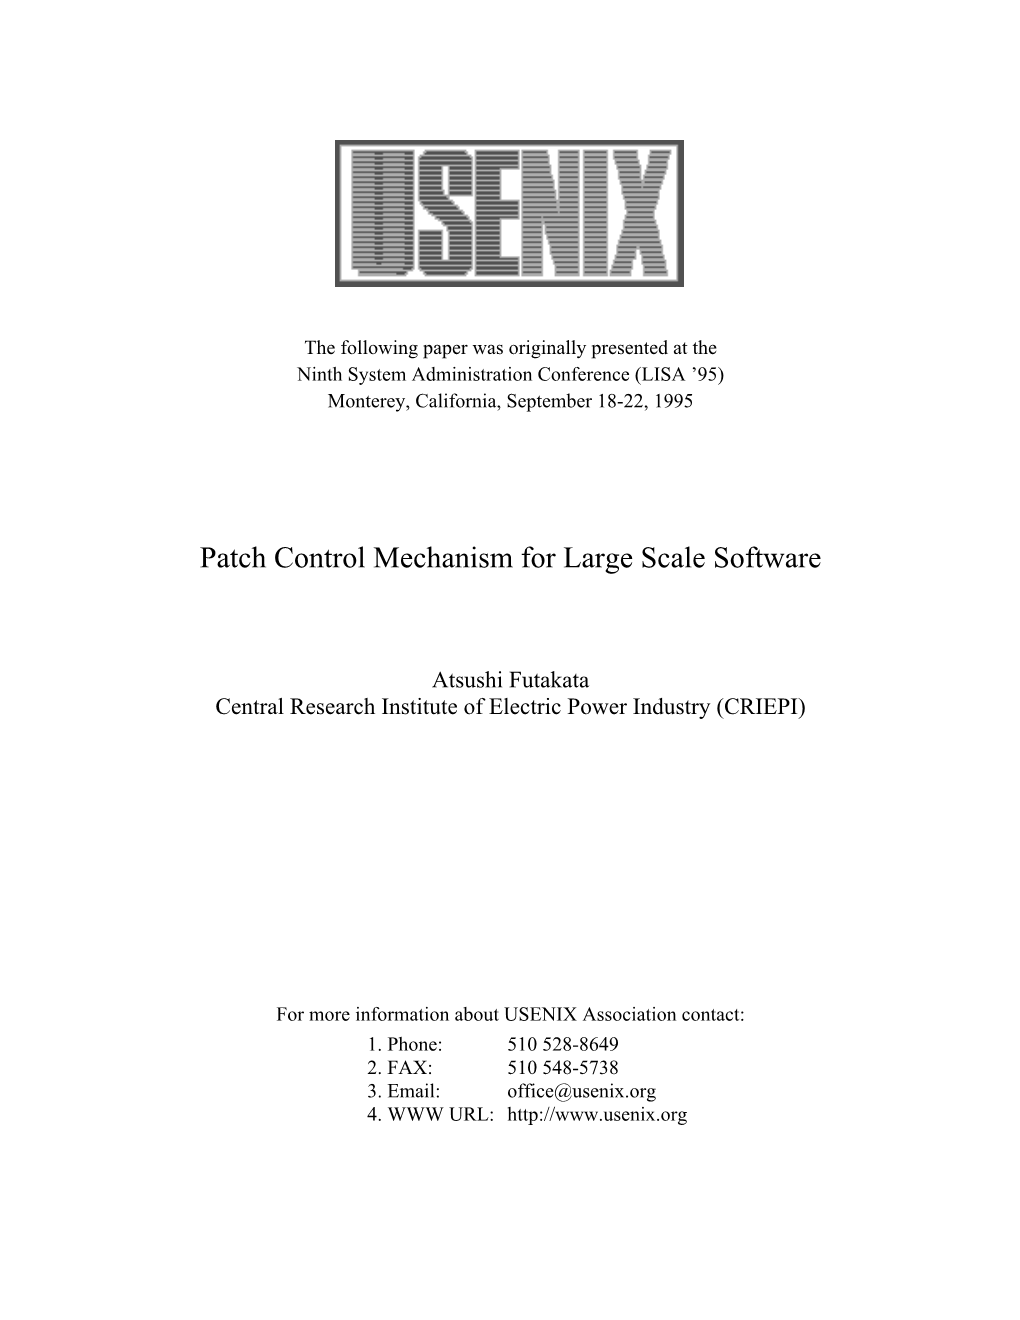 Patch Control Mechanism for Large Scale Software